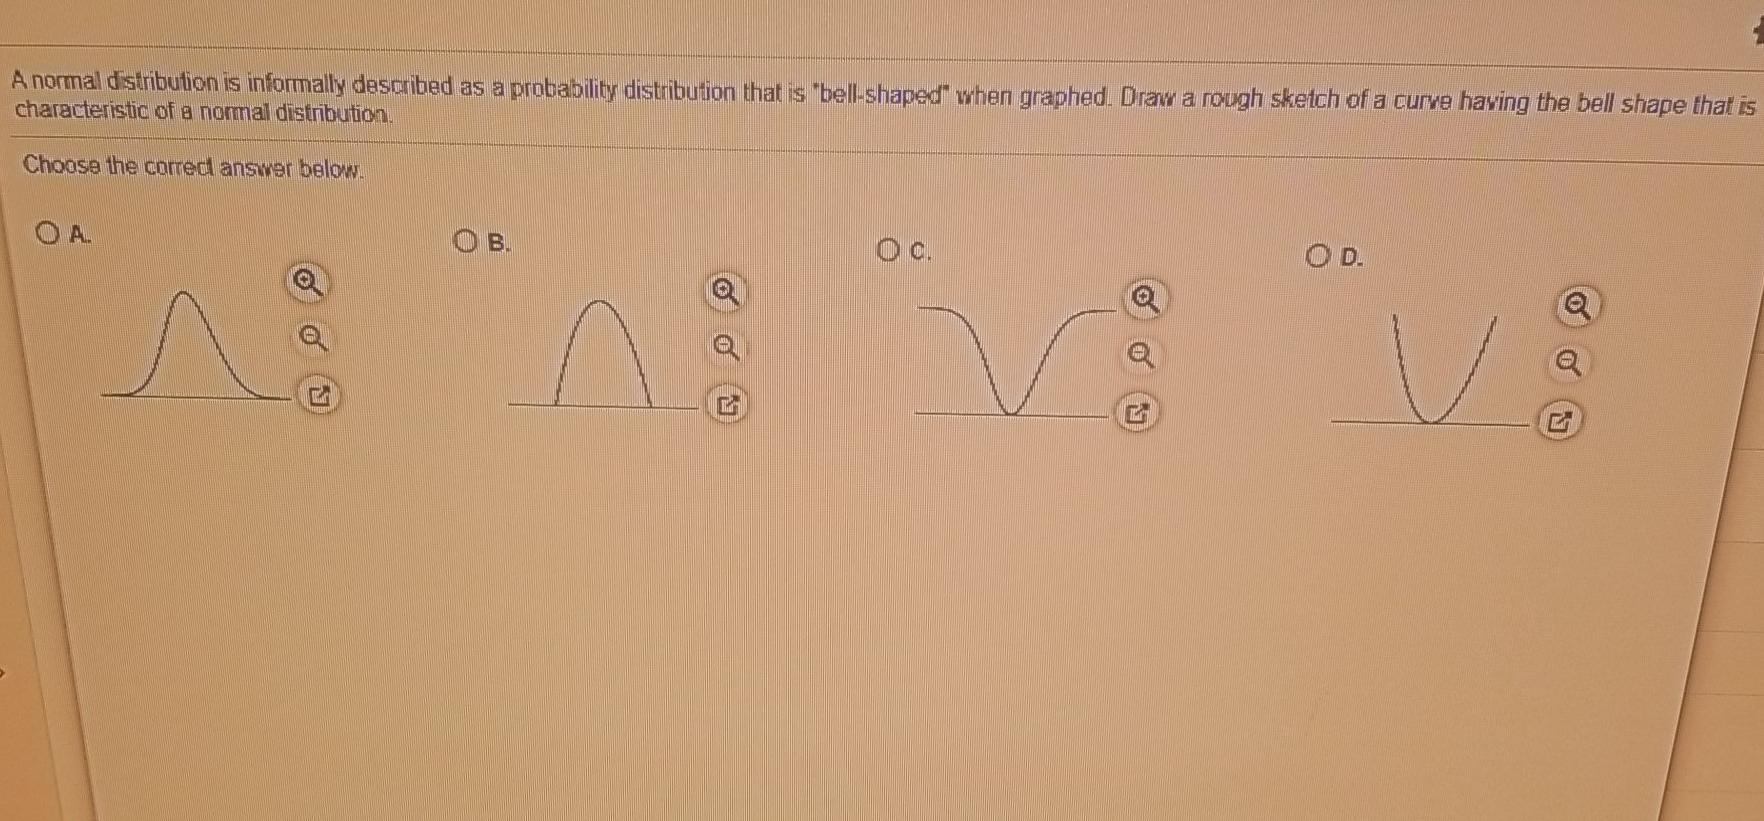 A normal distribution is informally described as a probability distribution  that is ?bell-shaped? when graphed. Draw a rough sketch of a curve having  the bell shape that is characteristic of a normal